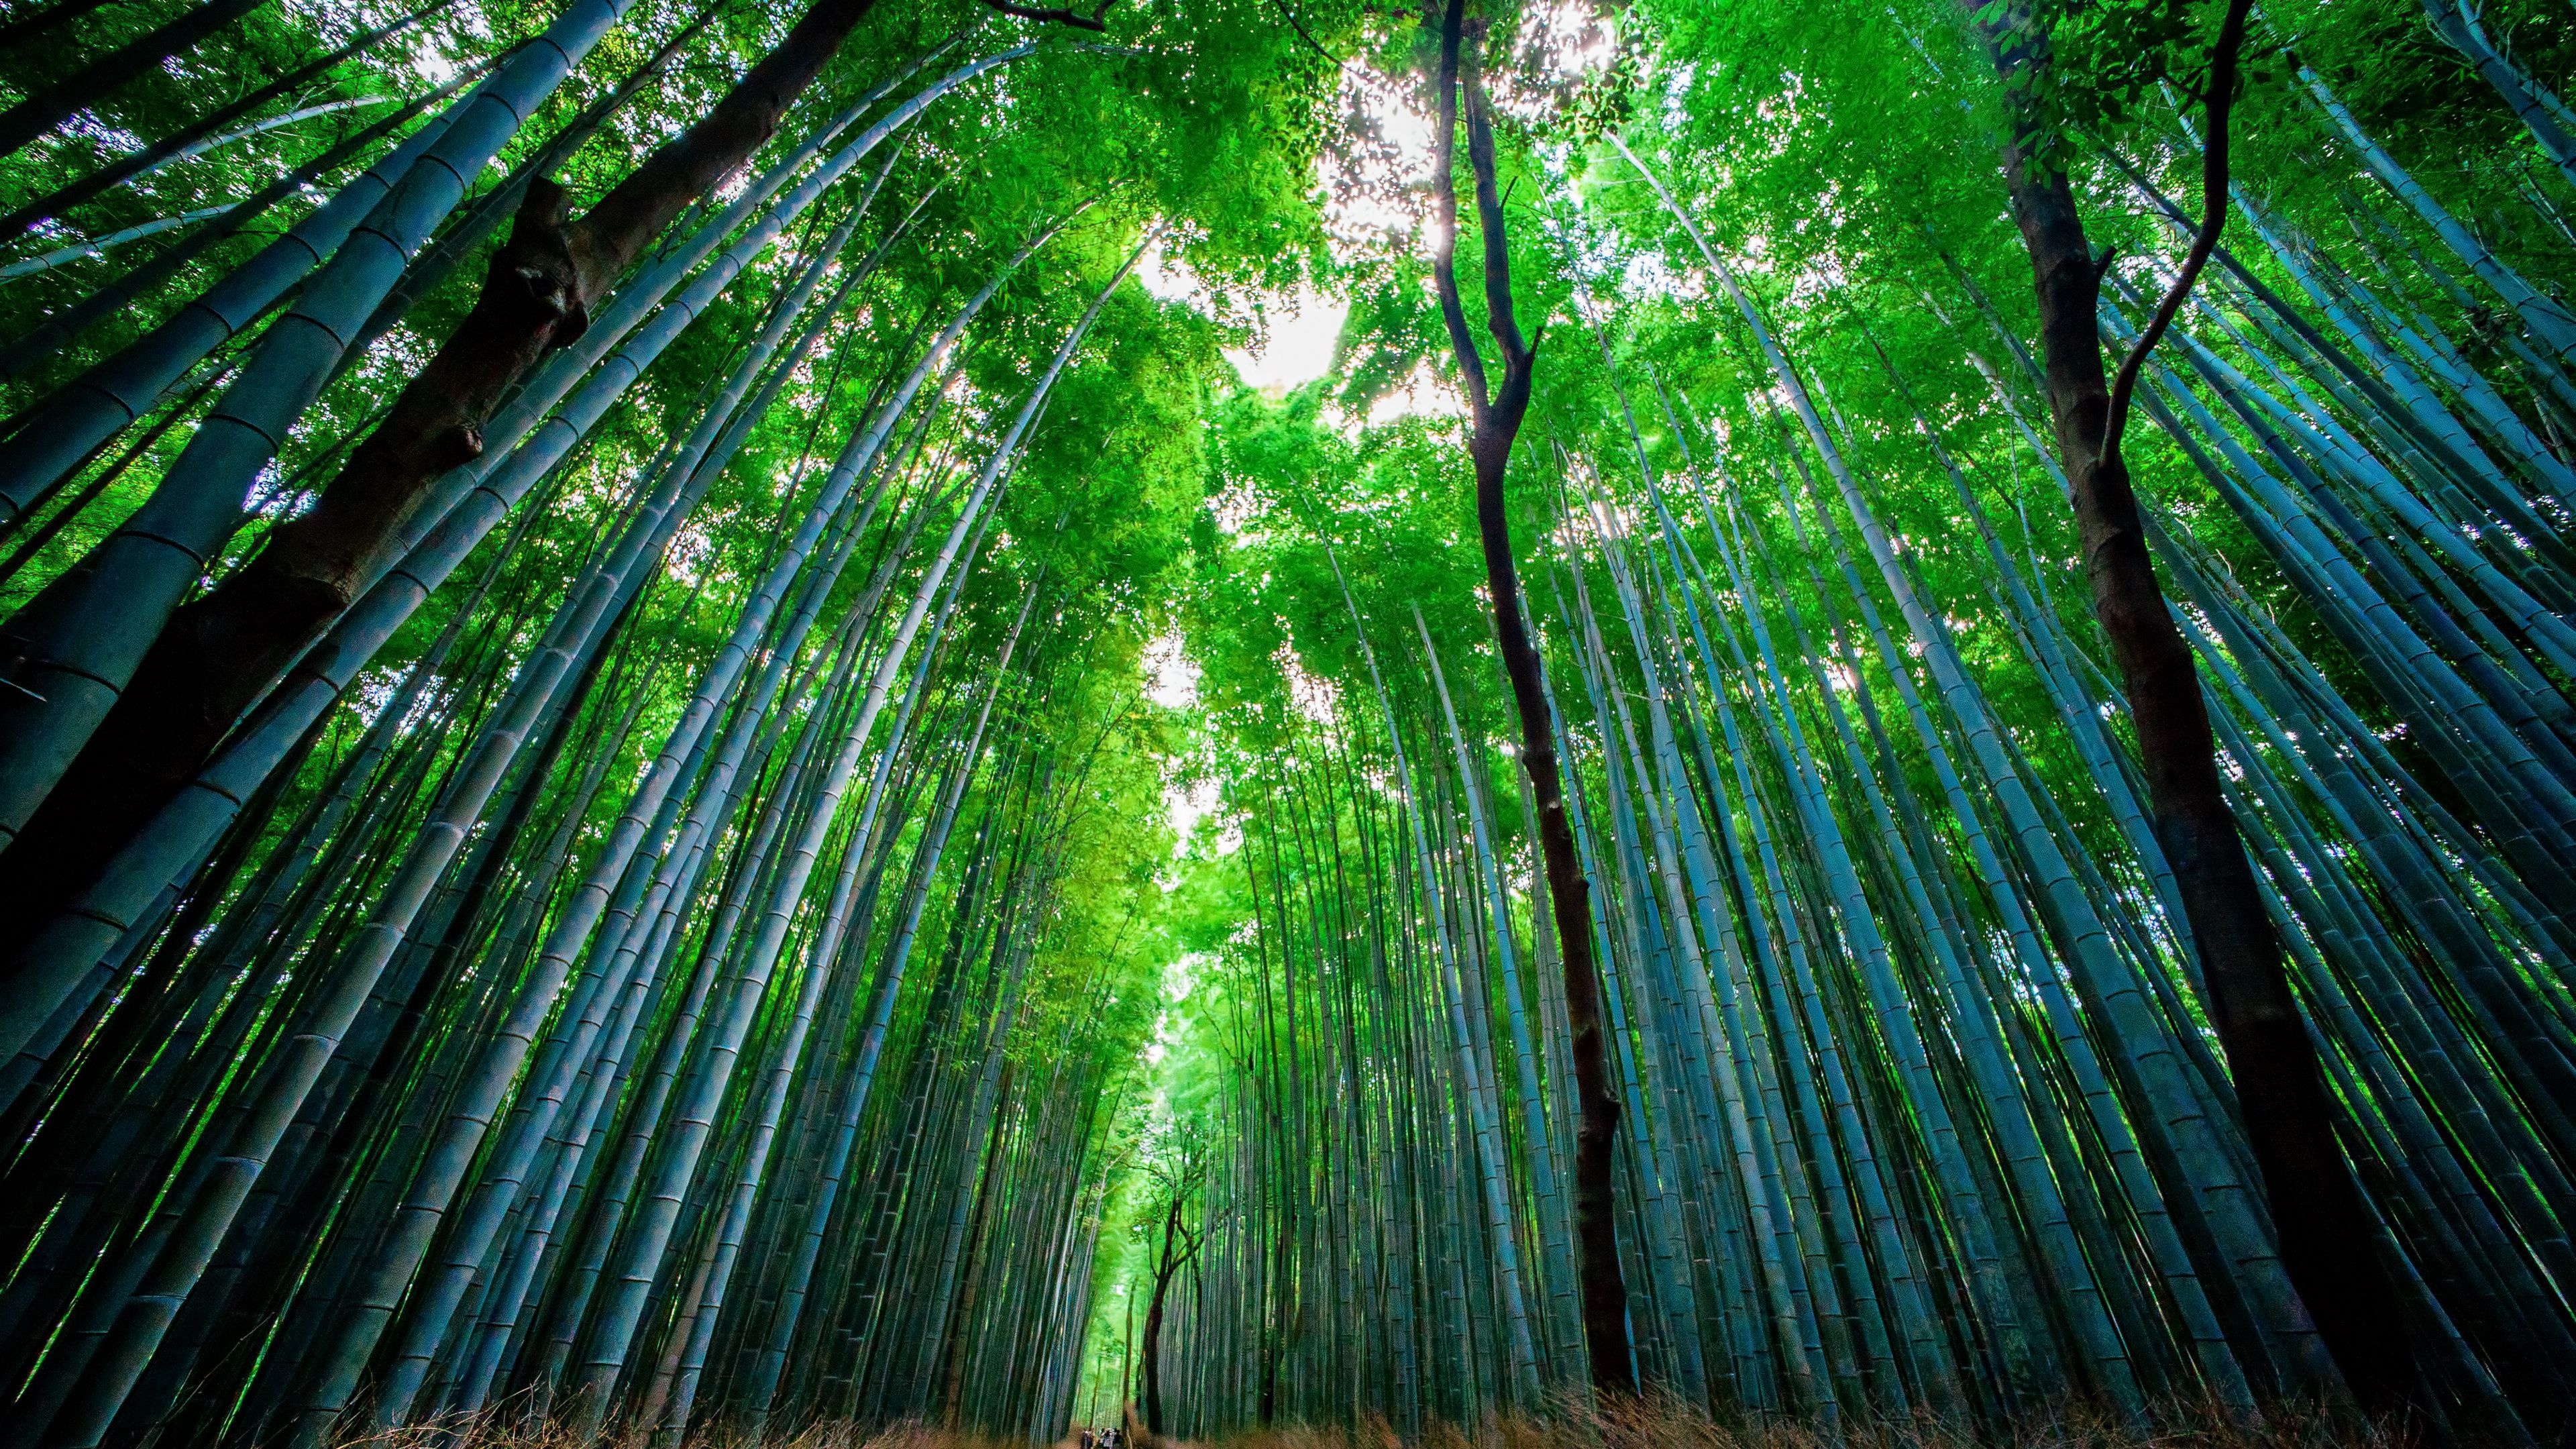 Bamboo: An arborescent grass of tropical which shoots that are used for food, Green forest. 3840x2160 4K Wallpaper.